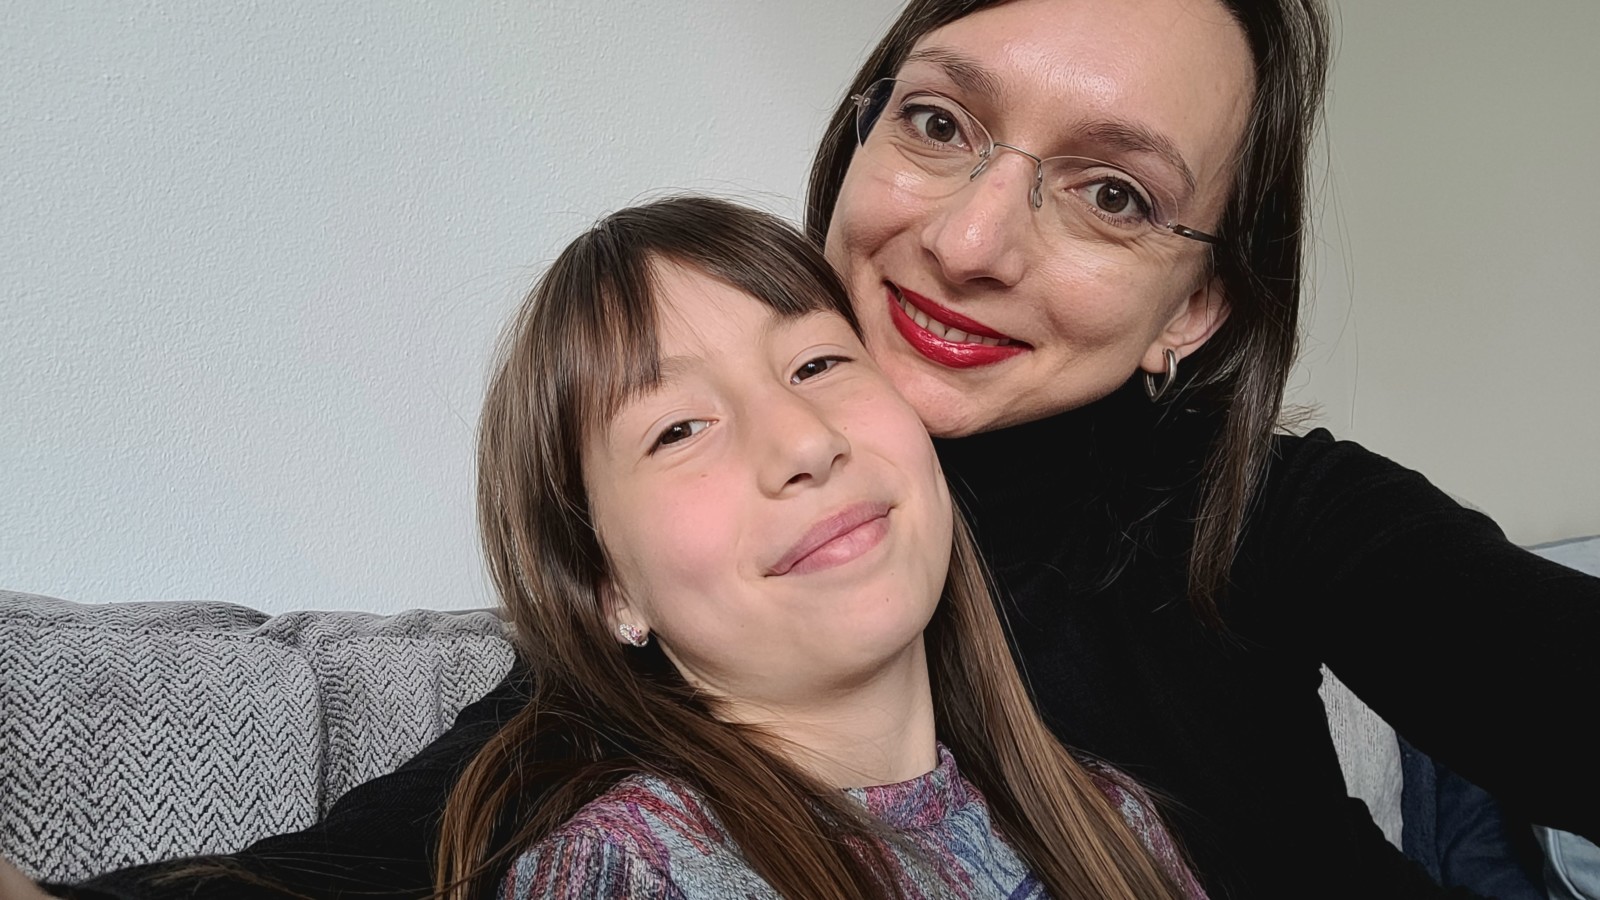 My sexual abuse story, my daughter, and red lipstick